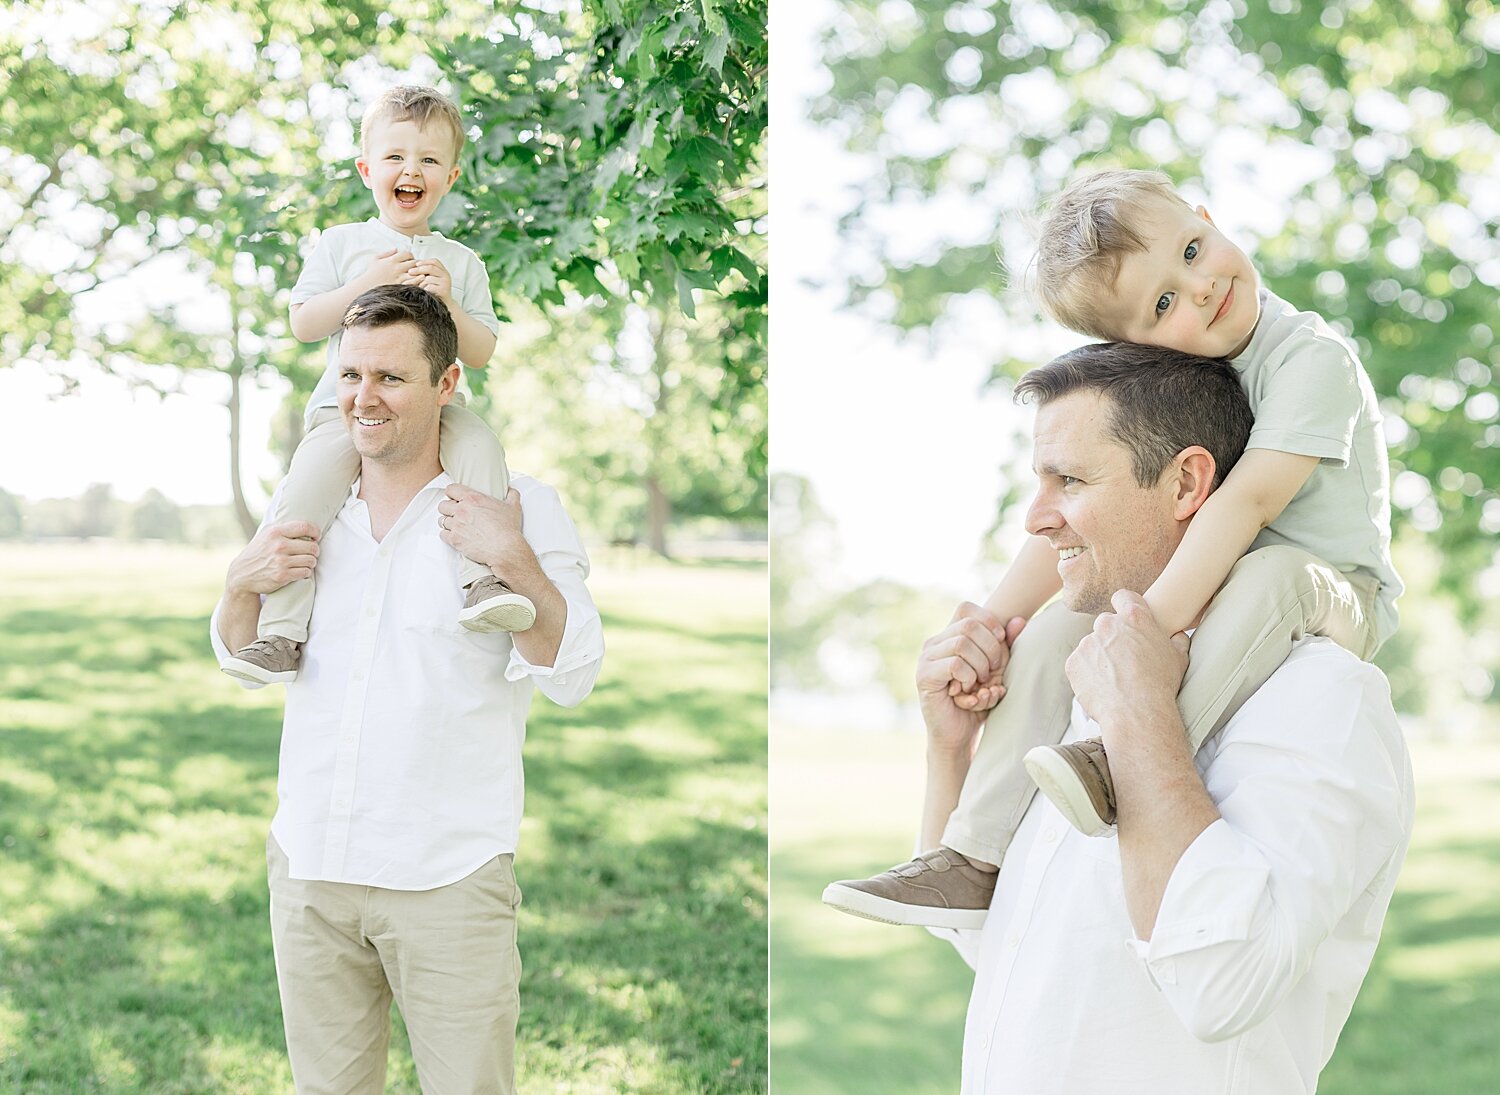 Toddler-aged boy riding on Dad's shoulders during family portraits with Kristin Wood Photography.